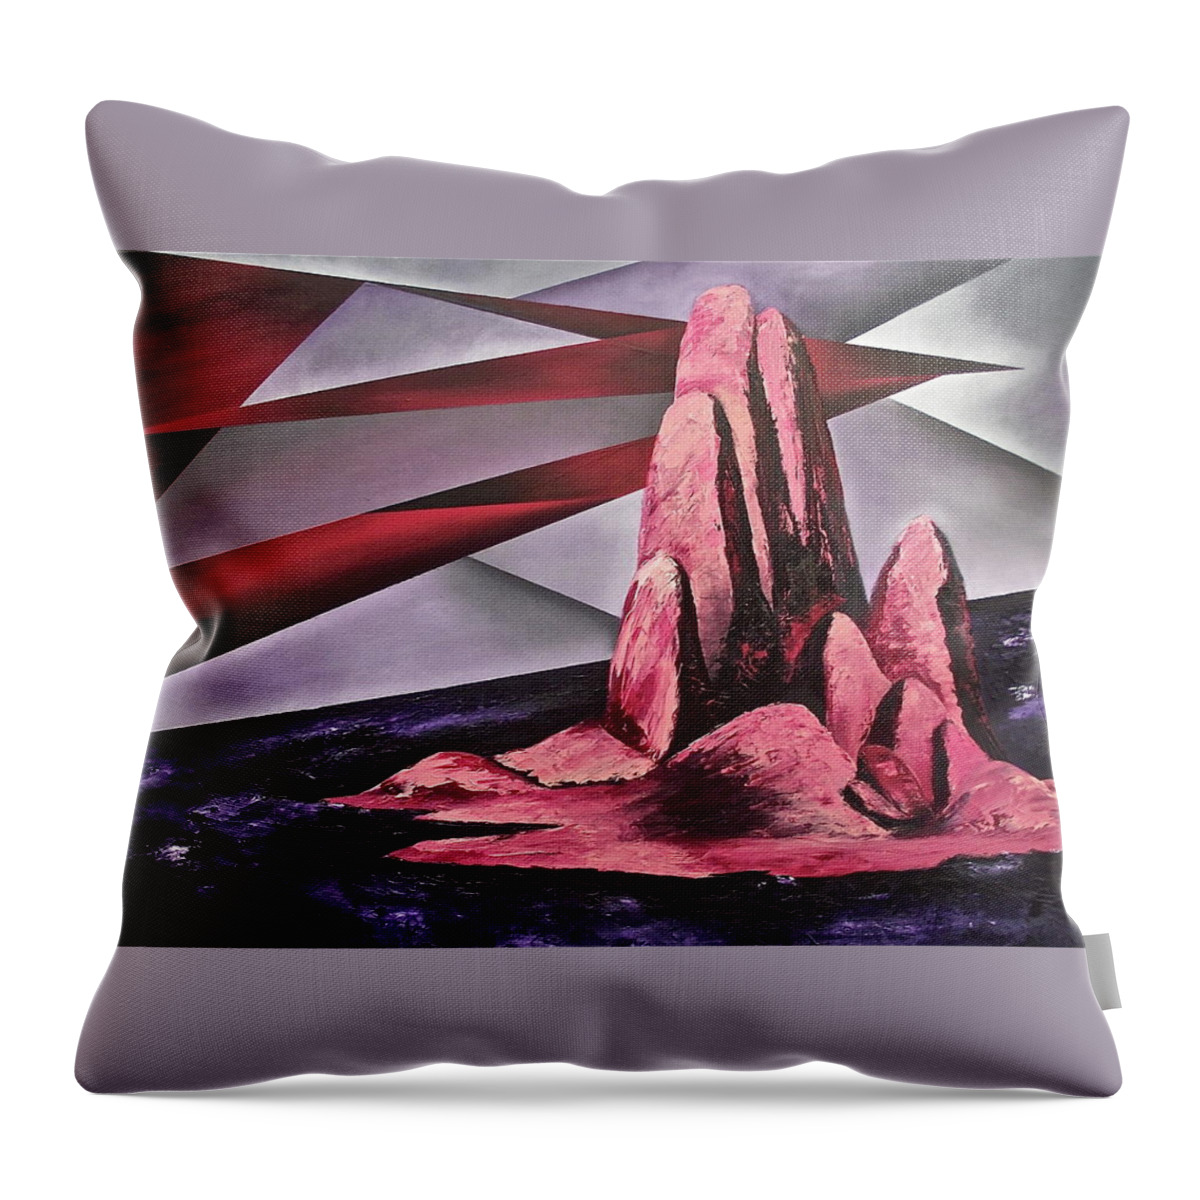  Throw Pillow featuring the painting Standing Still by Ara Elena